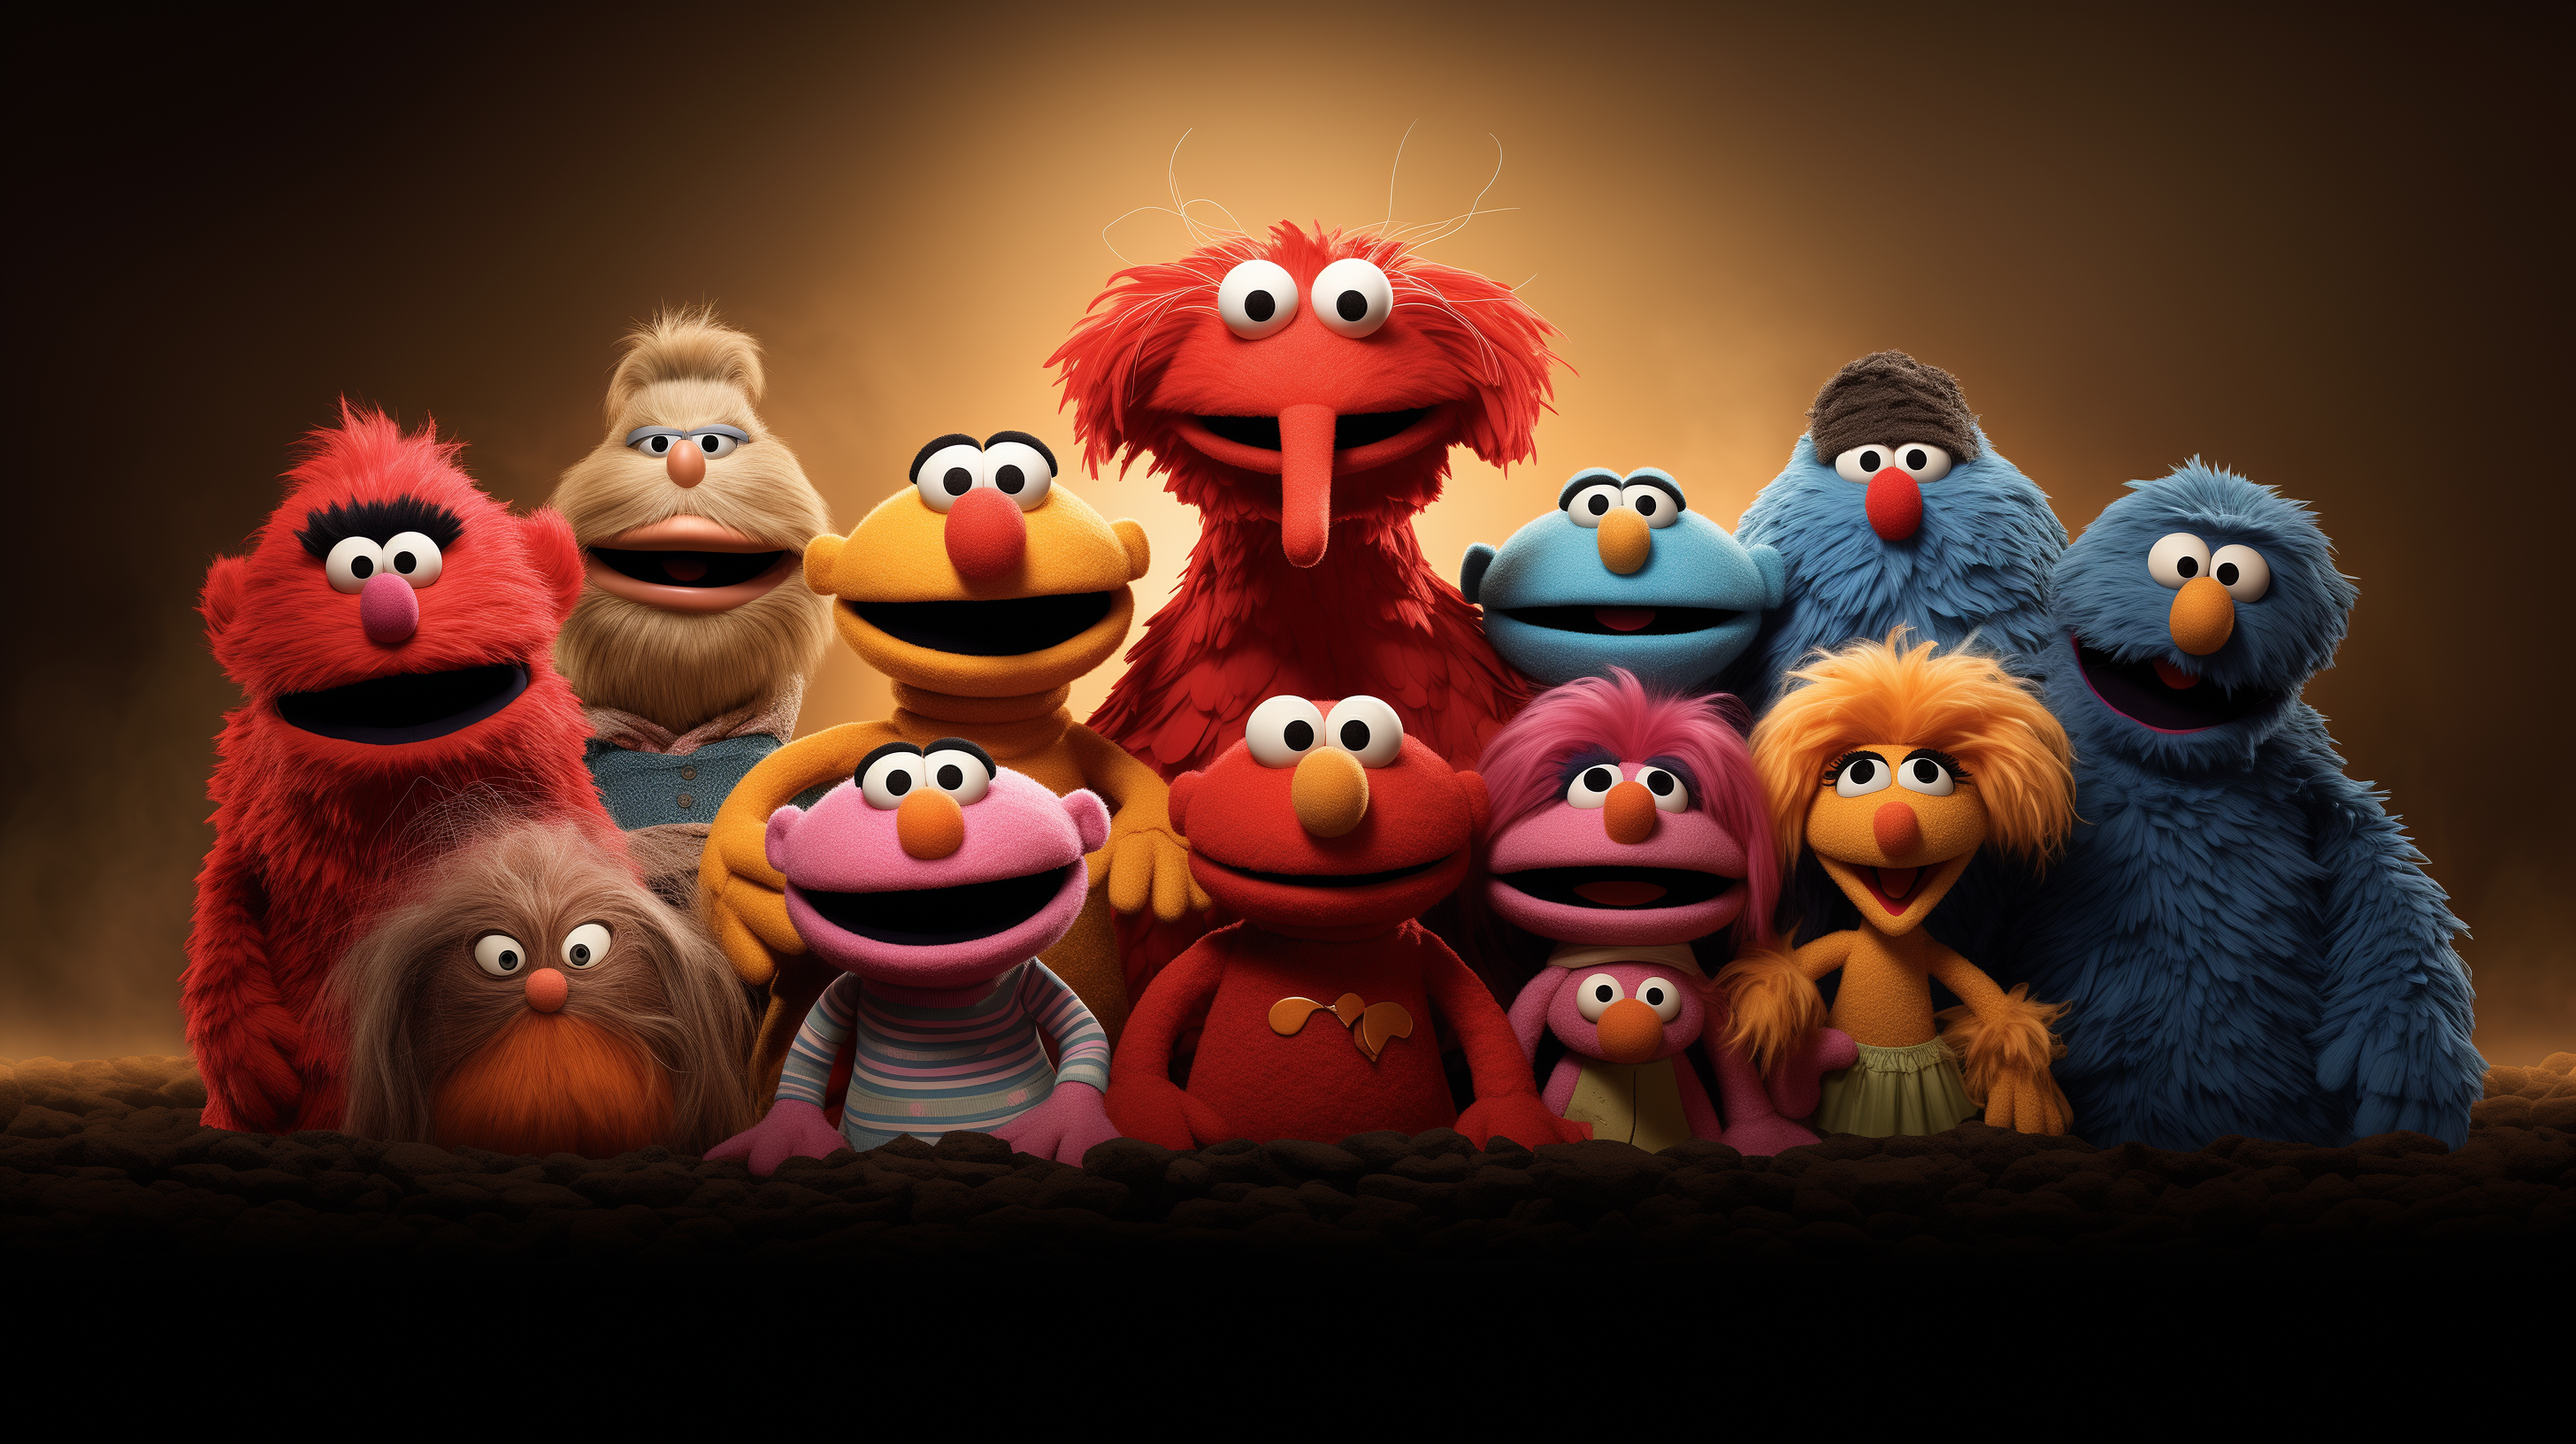 HD wallpaper featuring colorful Sesame Street characters grouped together for a cheerful desktop background.